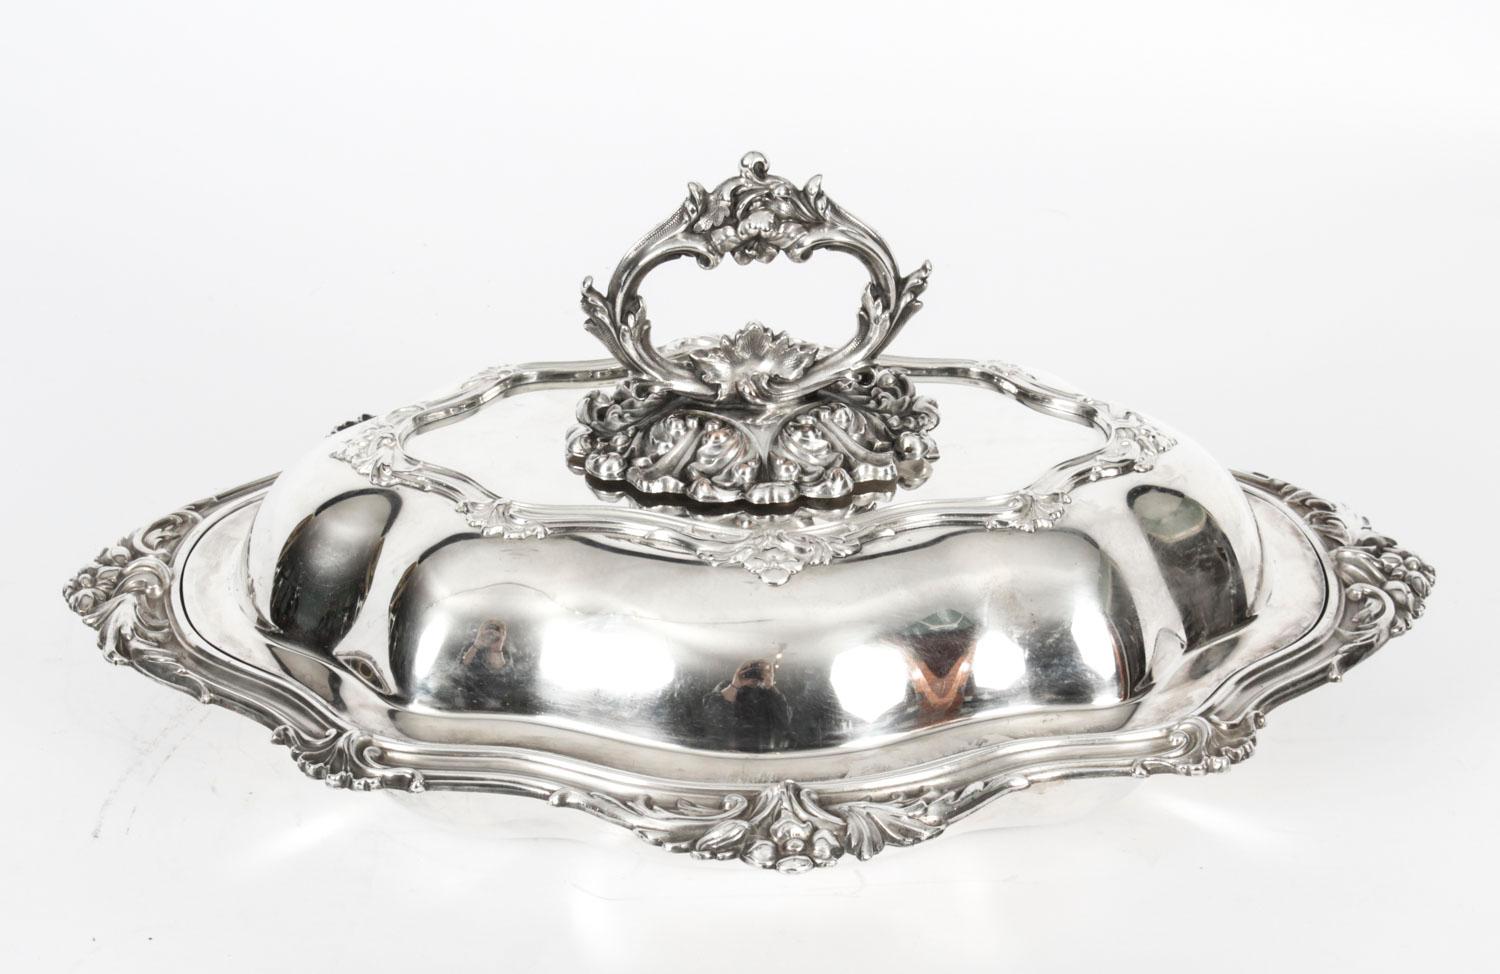 This is a wonderful antique English Victorian Old Sheffield silver-plated twin entree dish, early 19th century in date.

This splendid large tray features beautifully engraved floral and foliate decoration. The border and twin handles are